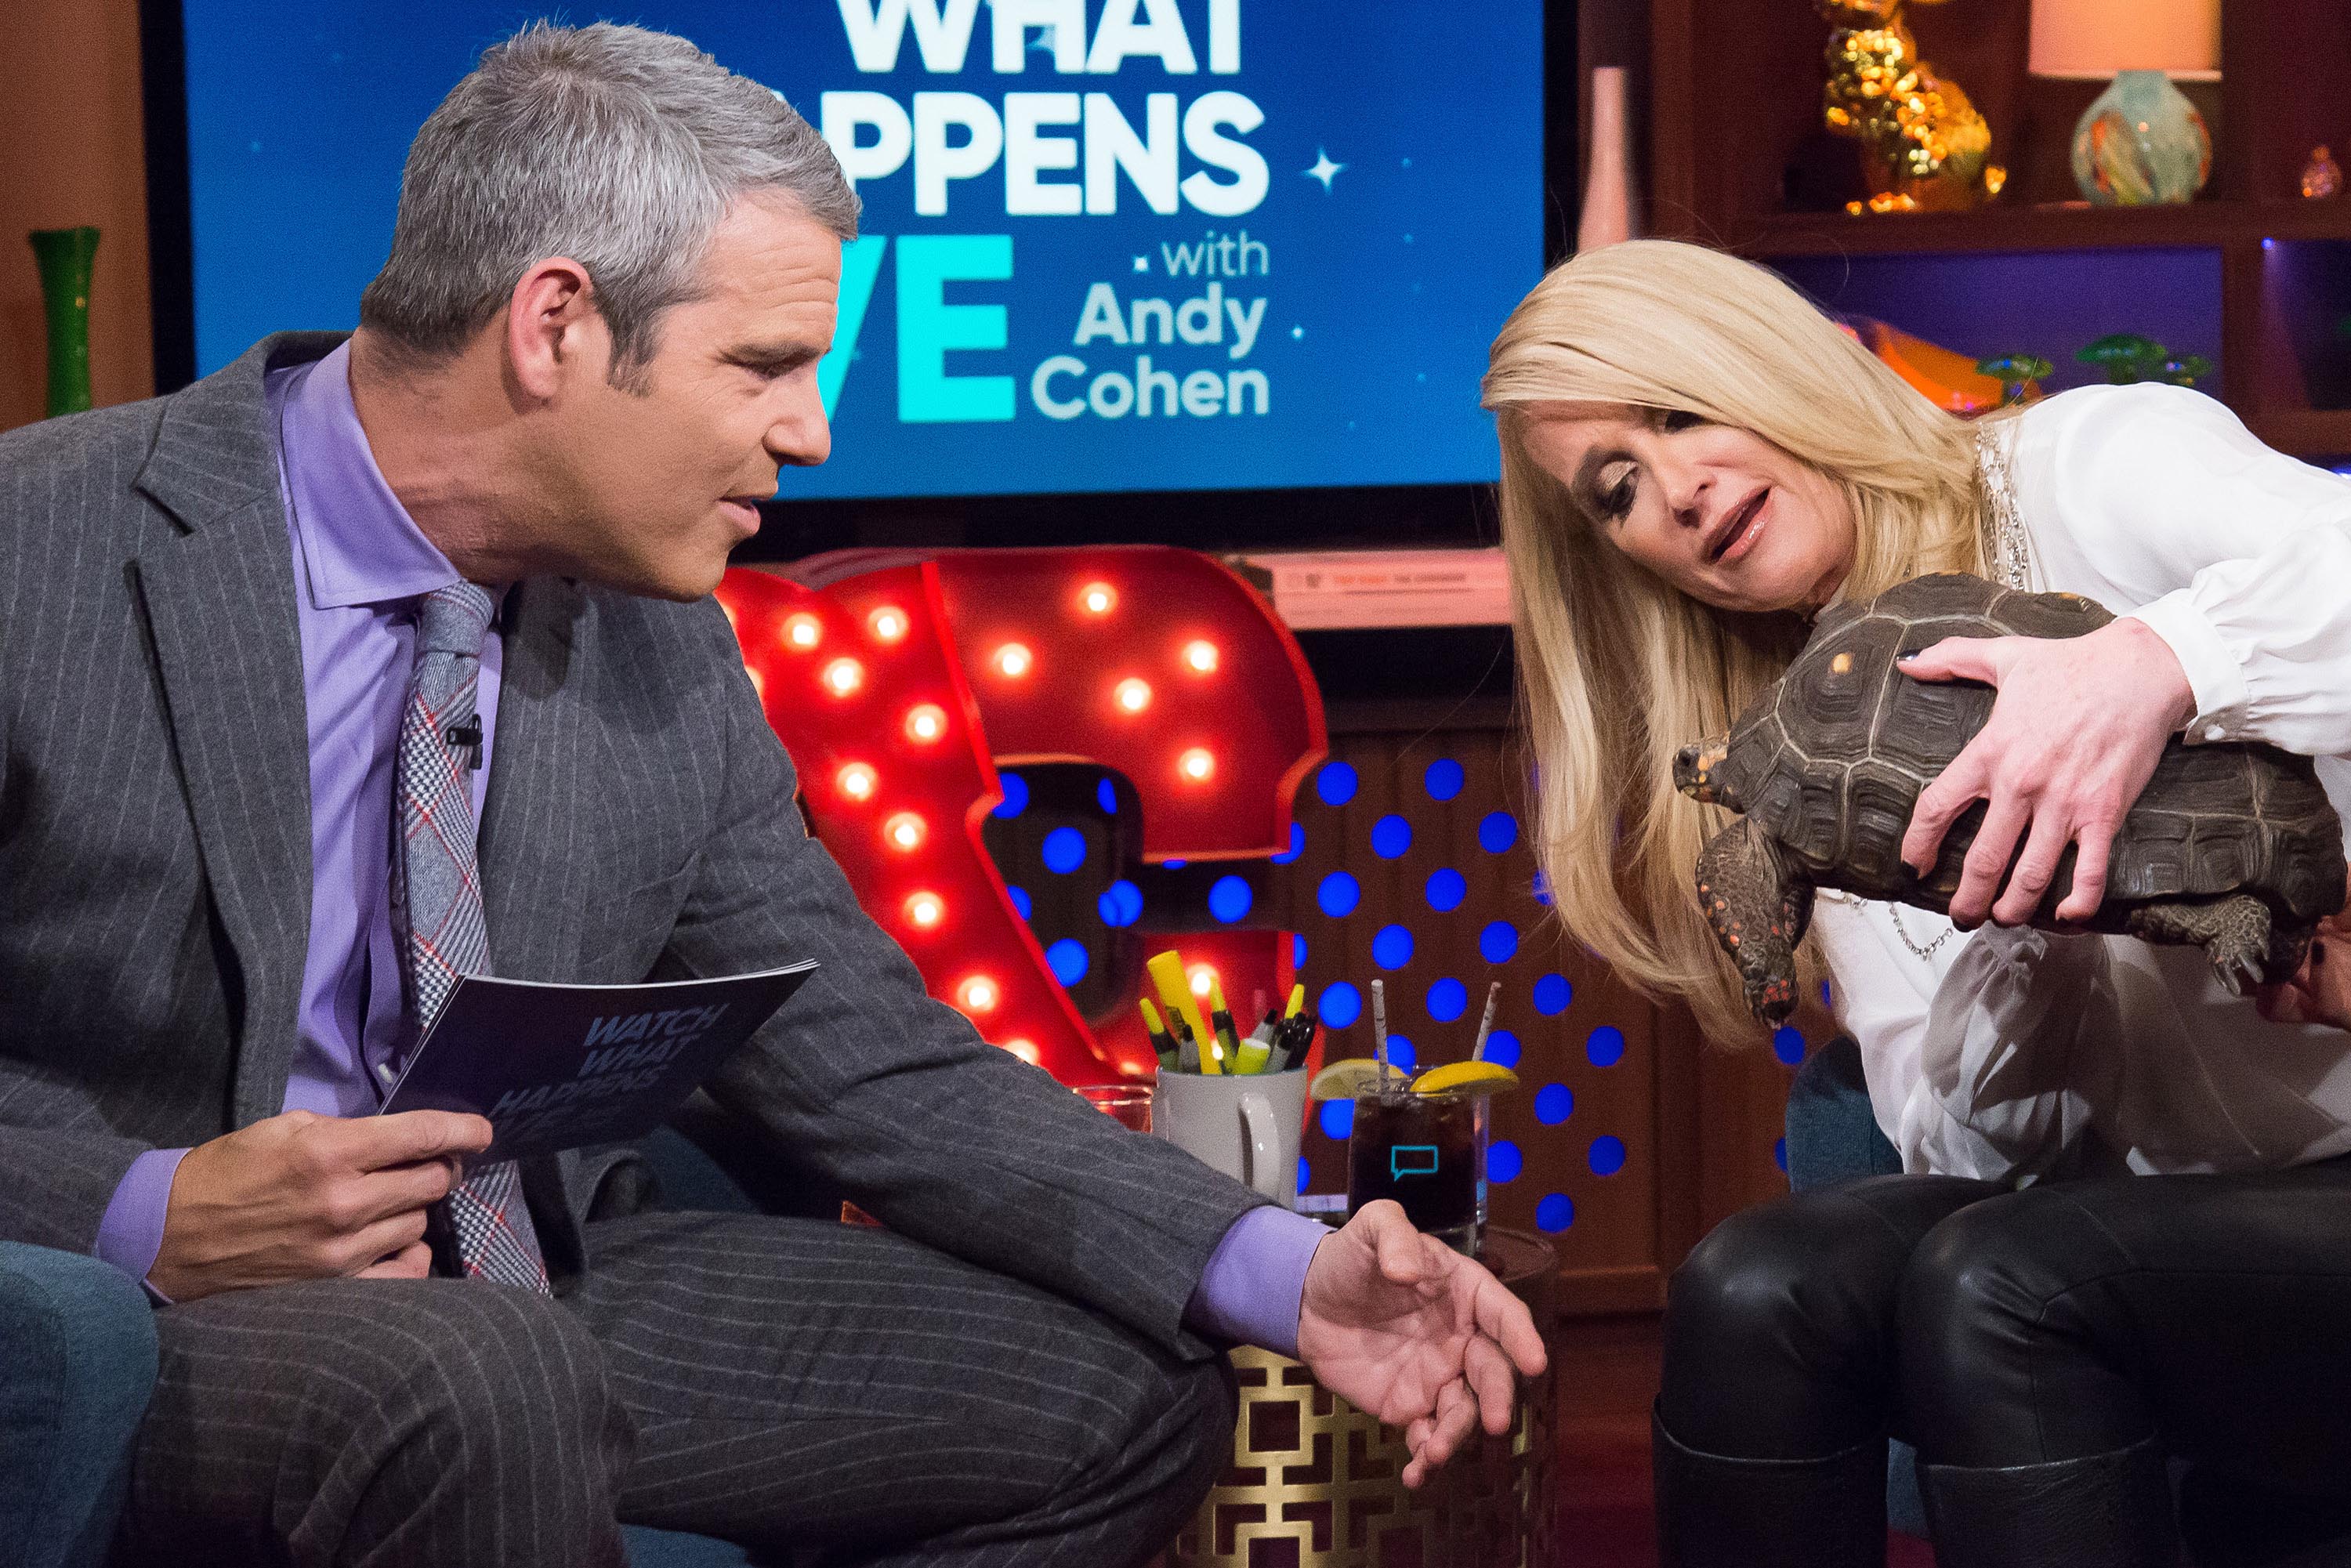 Kim Richards at Watch What Happens Live with Andy Cohen